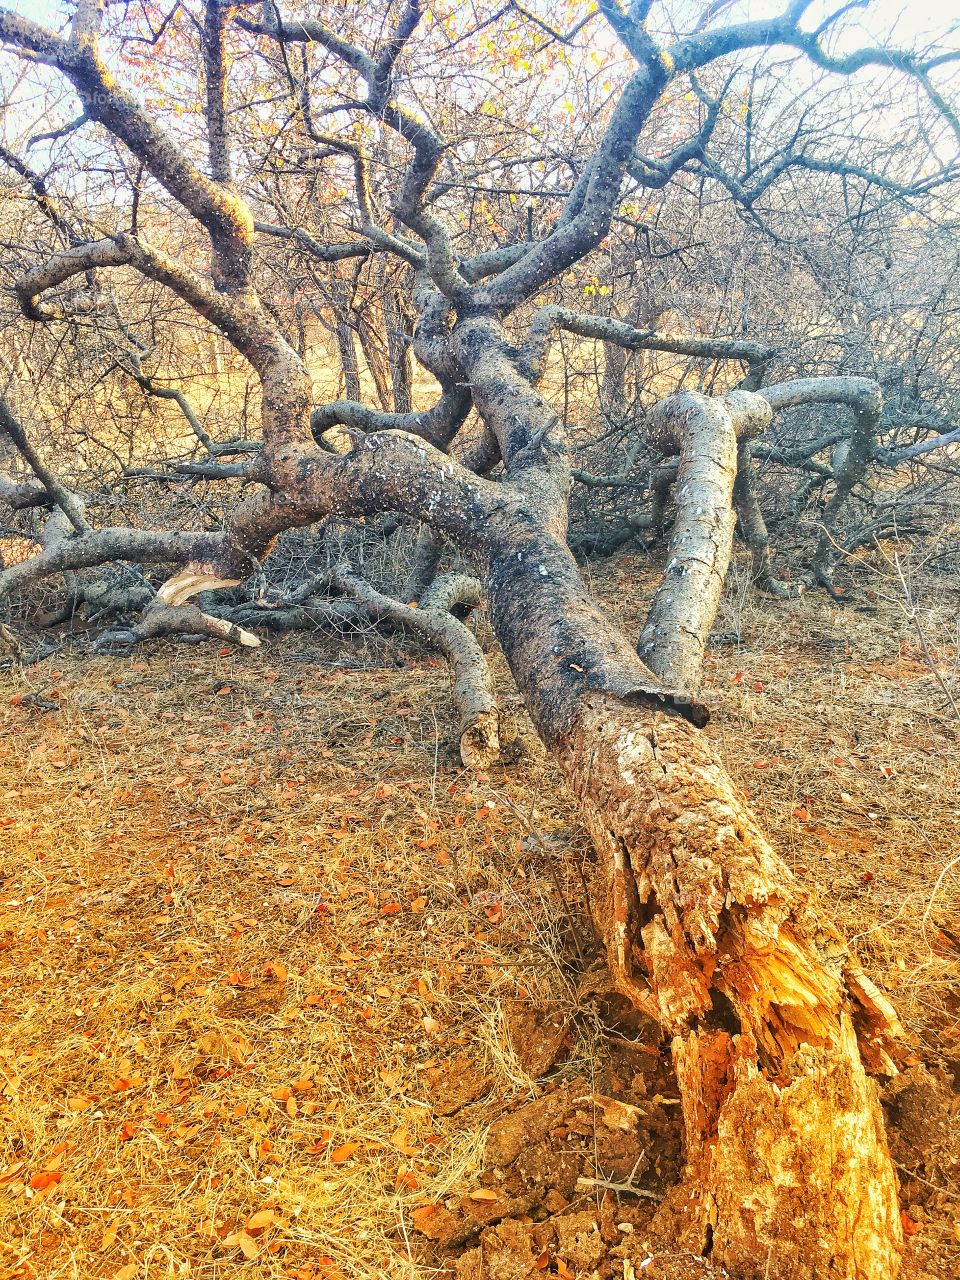 Tree died of old age, Louis Trichard, Limpopo, South Africa. 